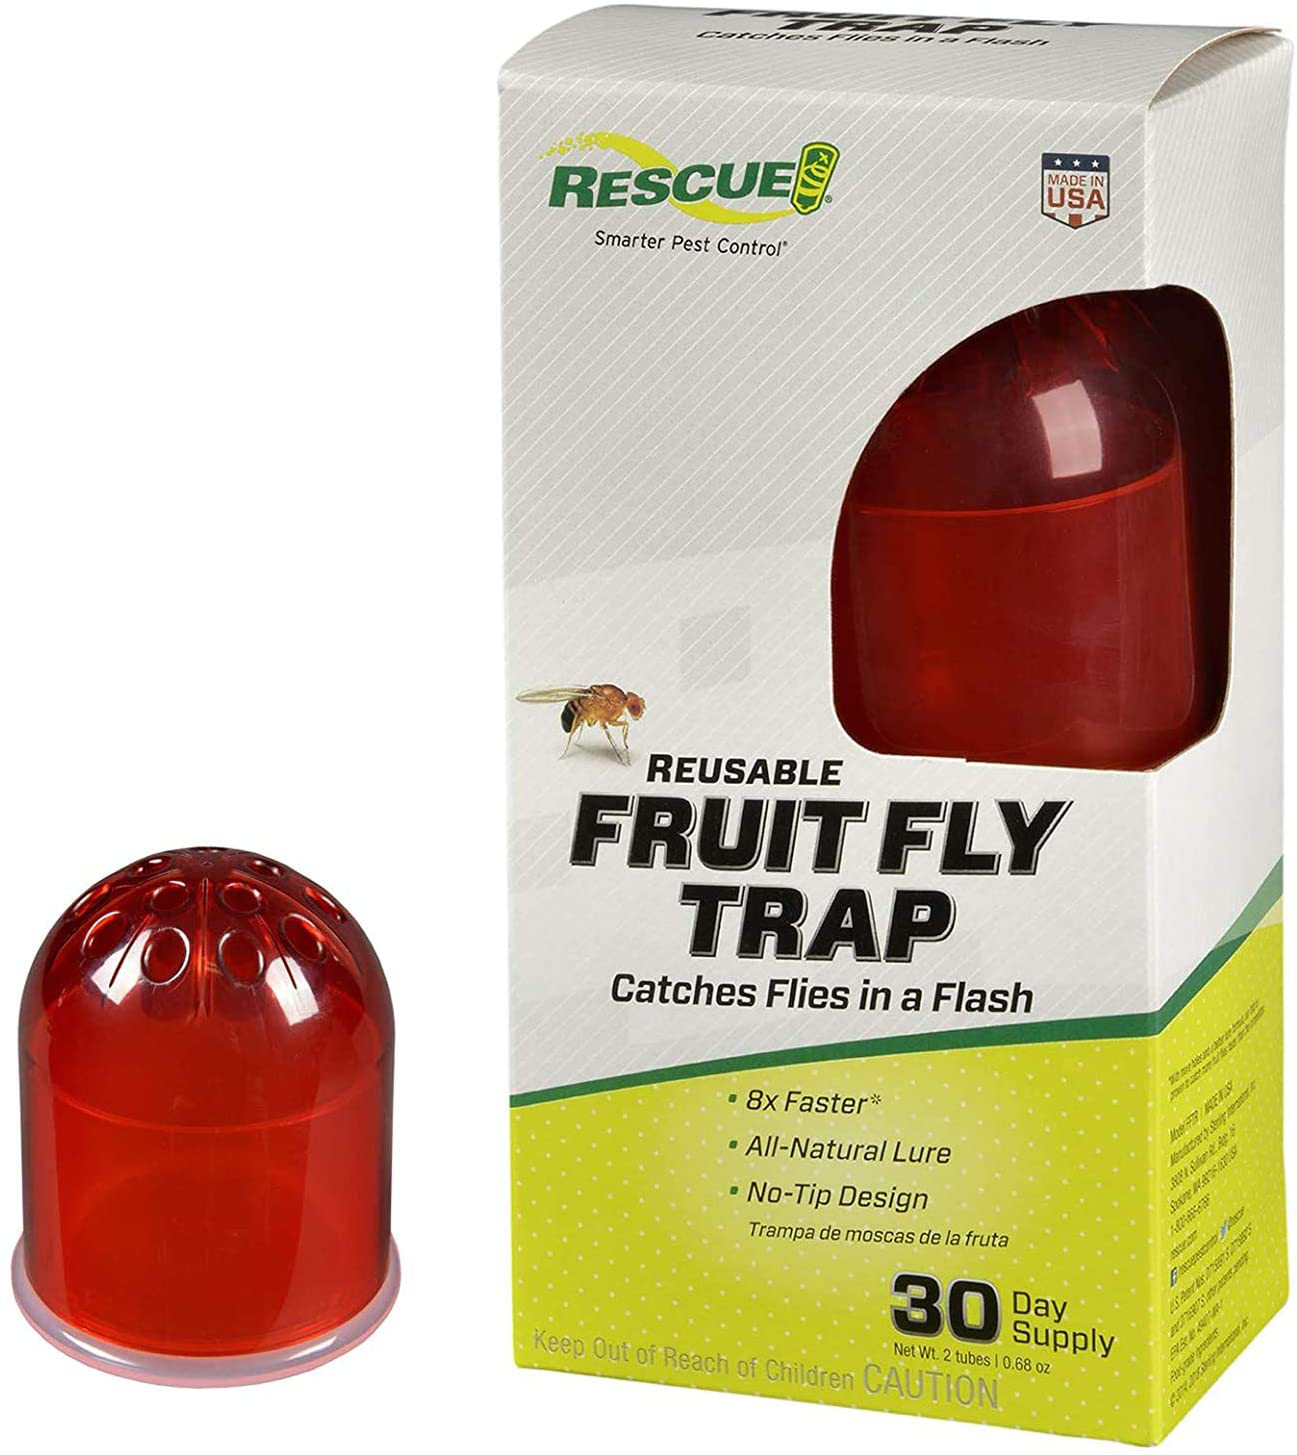 RESCUE! Reusable Fruit Fly Trap with Liquid Attractant